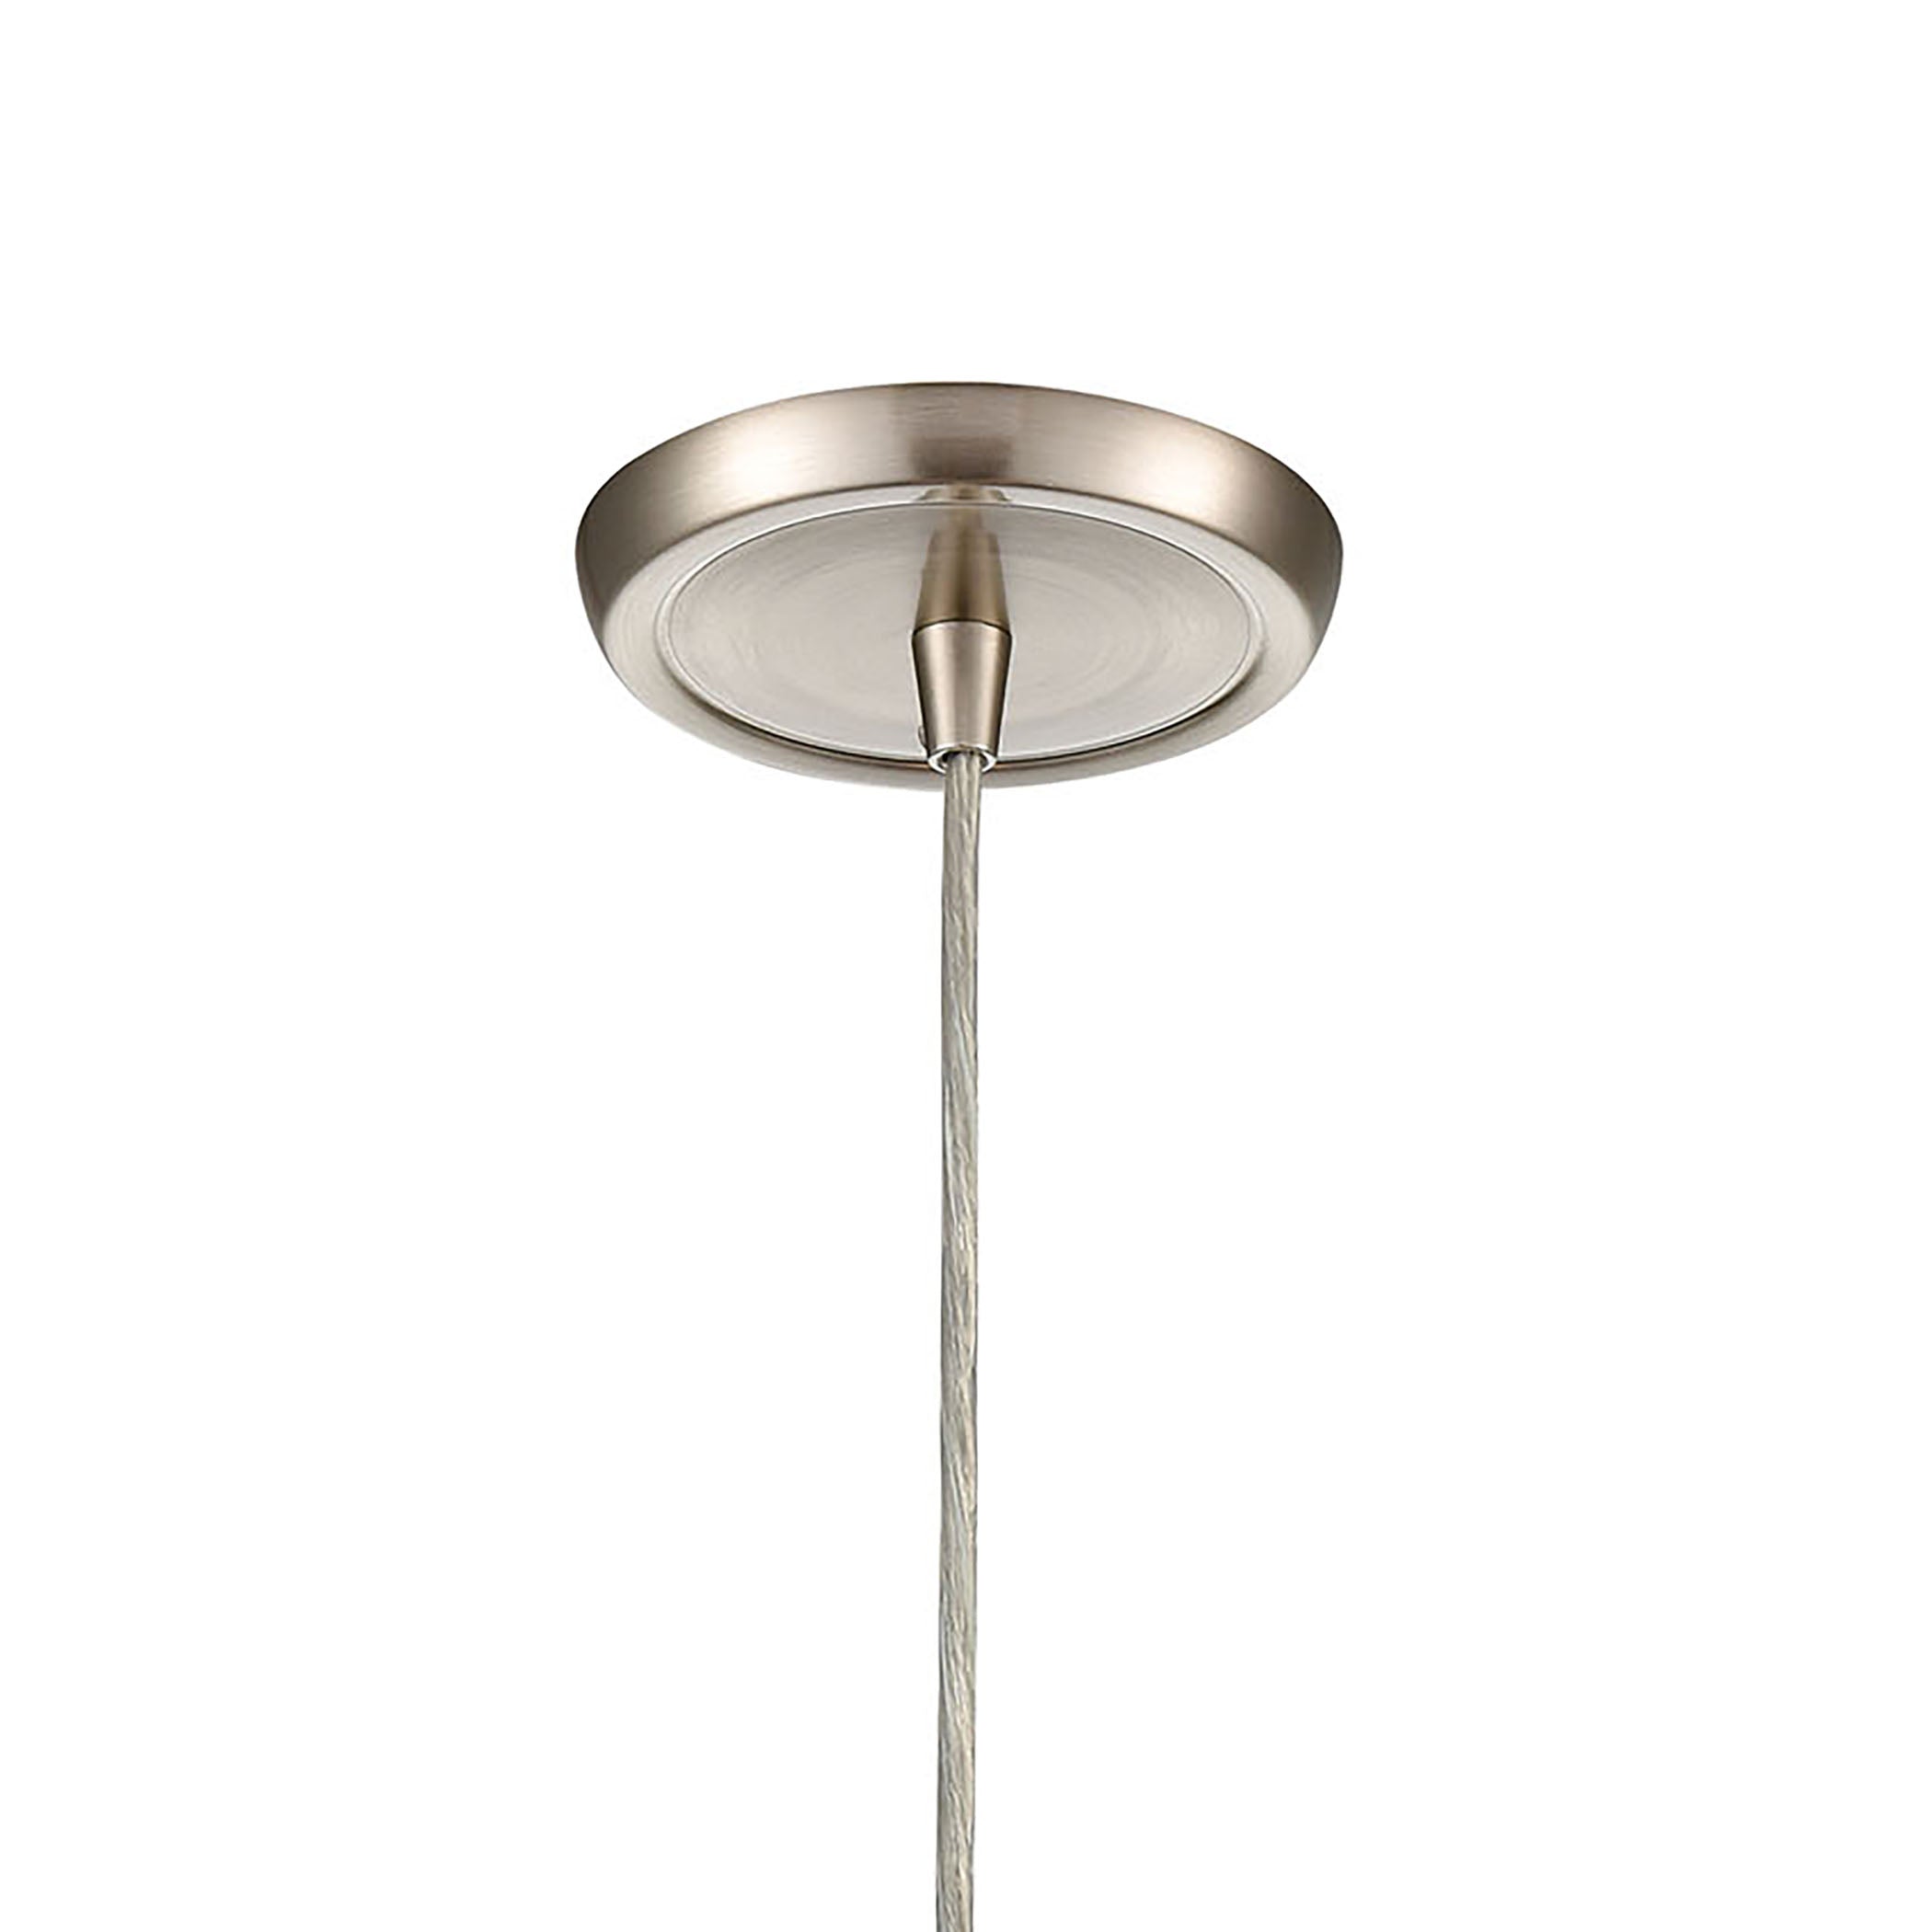 ELK Lighting 85214/1 Cirrus 1-Light Mini Pendant in Satin Nickel with Opal White and Clear Glass